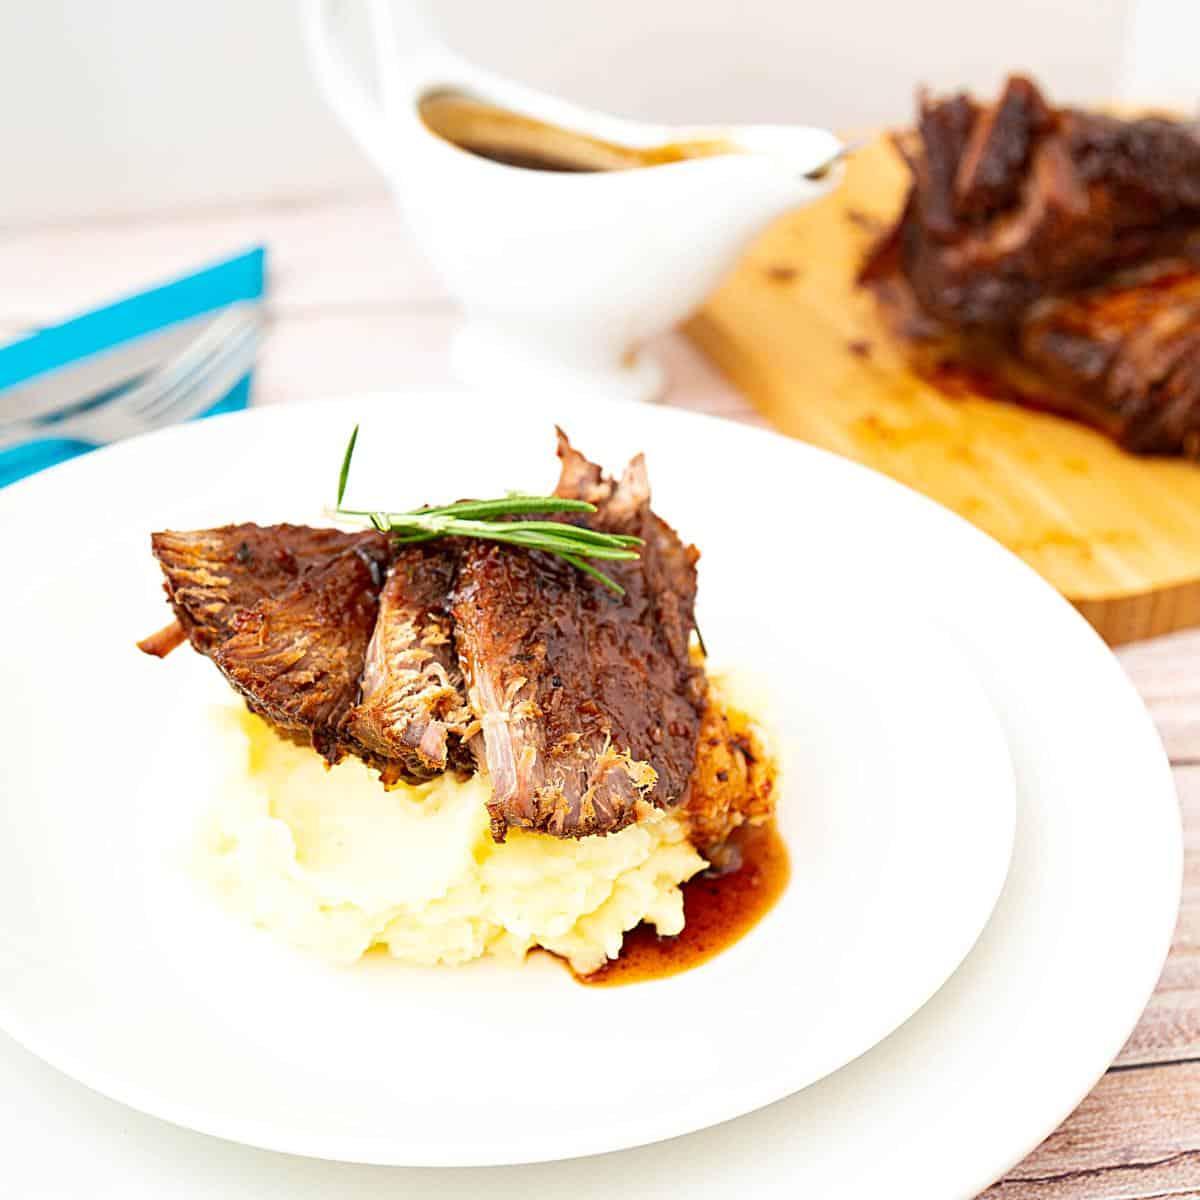 A plate with mashed potato and brisket.